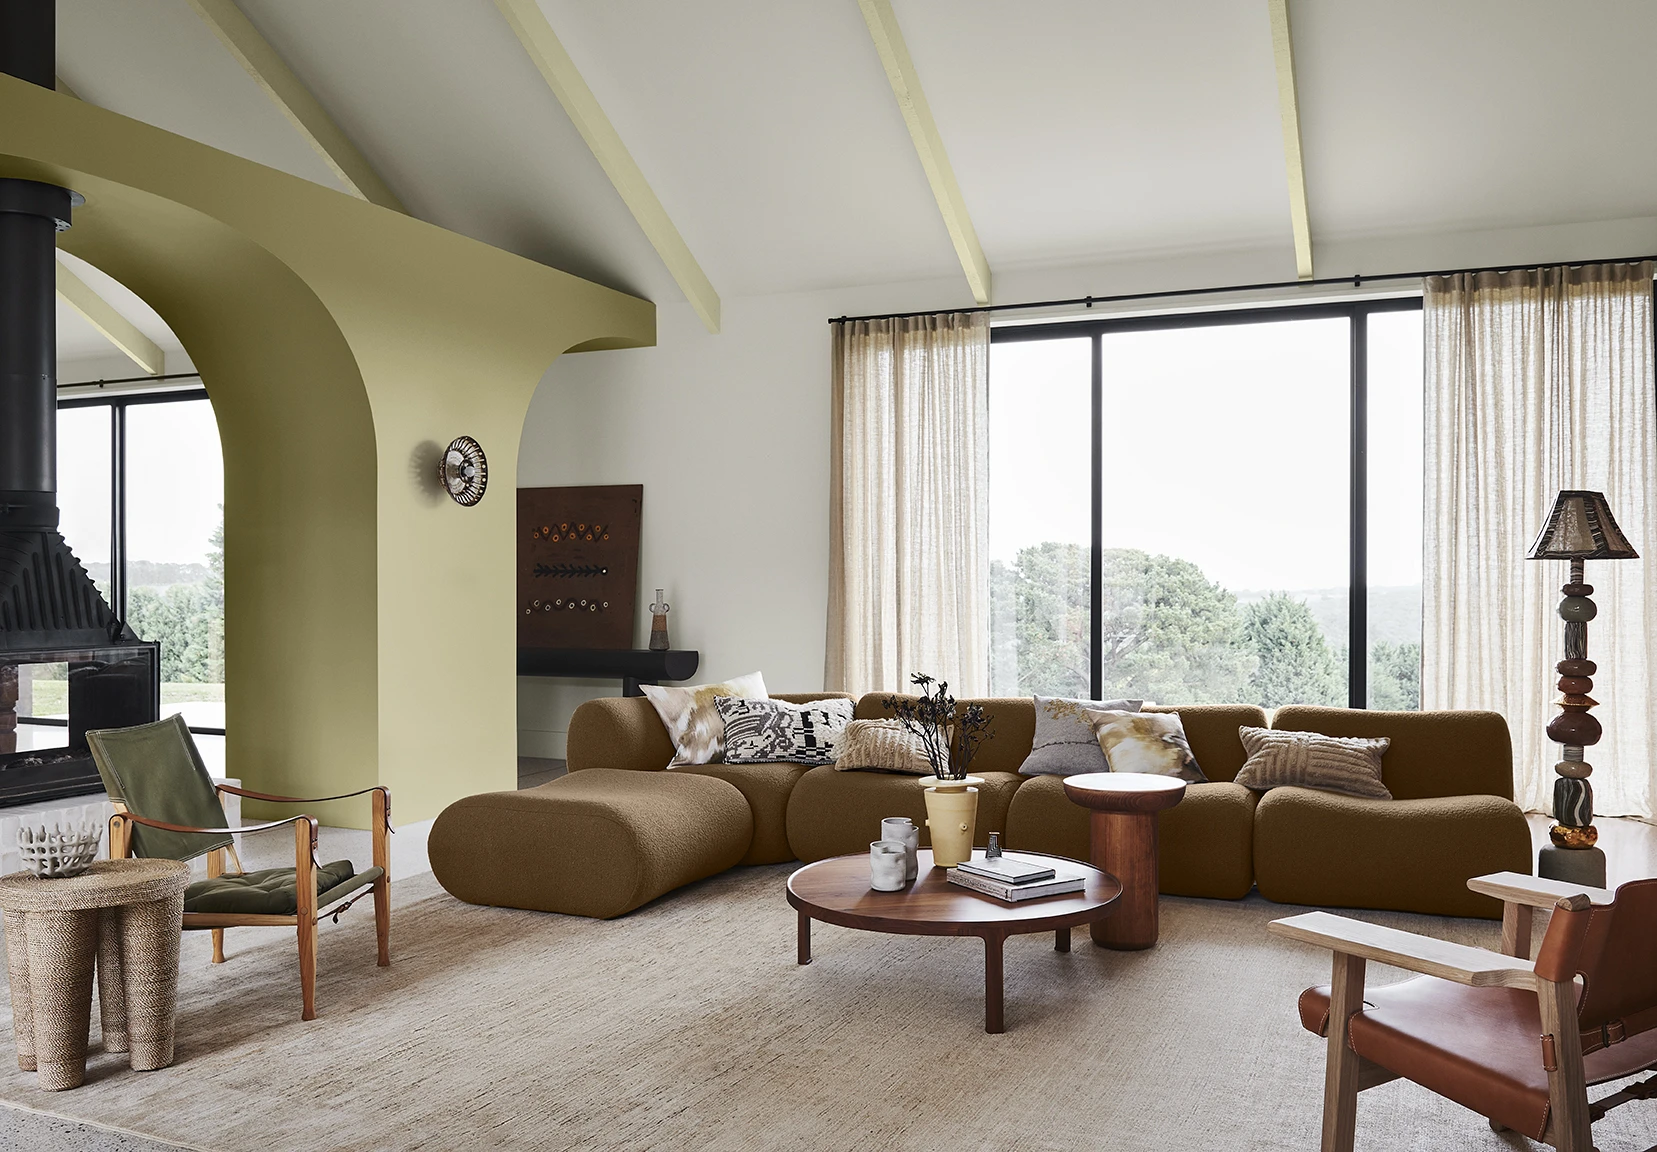 Dulux Paints - Give your living space a refreshing makeover with